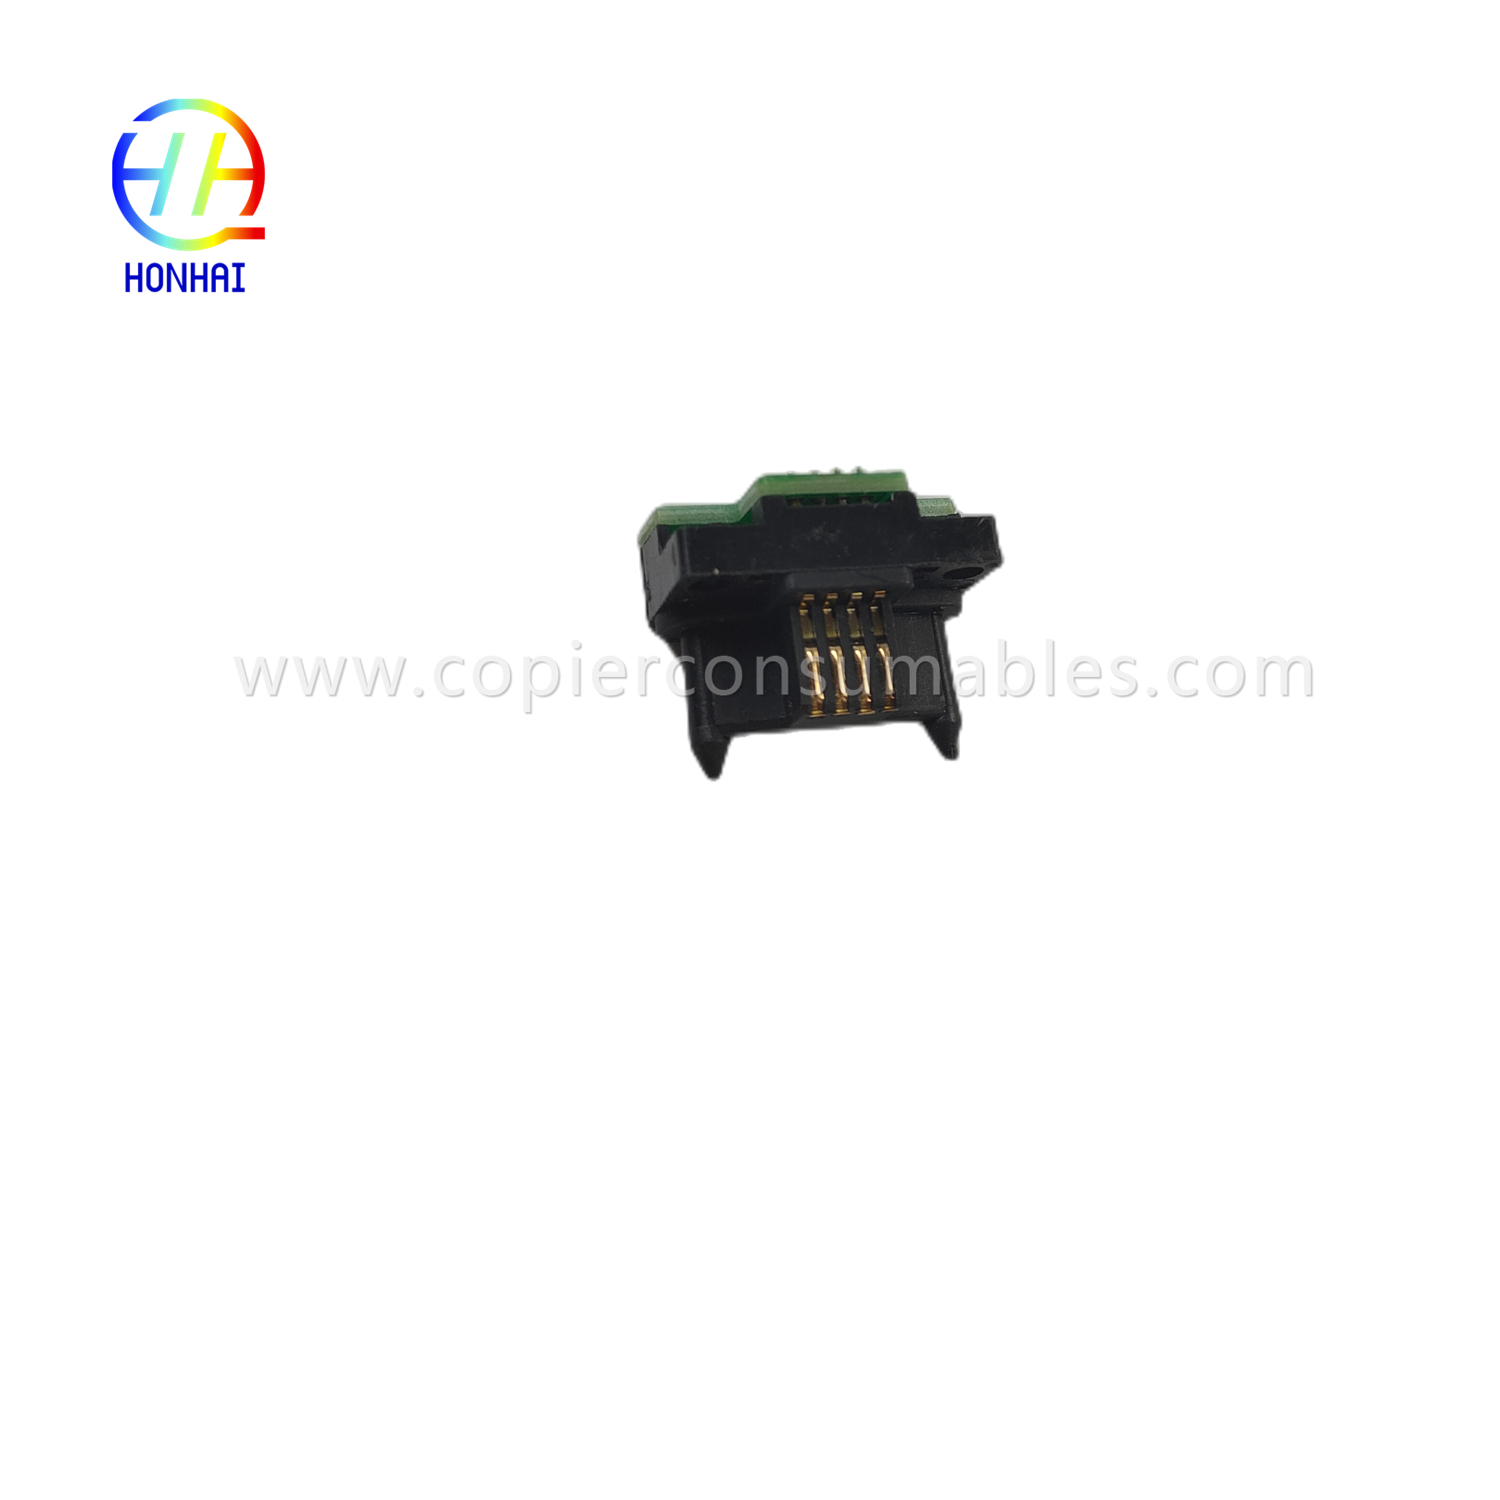 Fuser Chip for Xerox 109R00772 109R772 109R-00772 109R-772 WorkCentre 5765 5775 5790 5865 5875 5890 (3)_副本